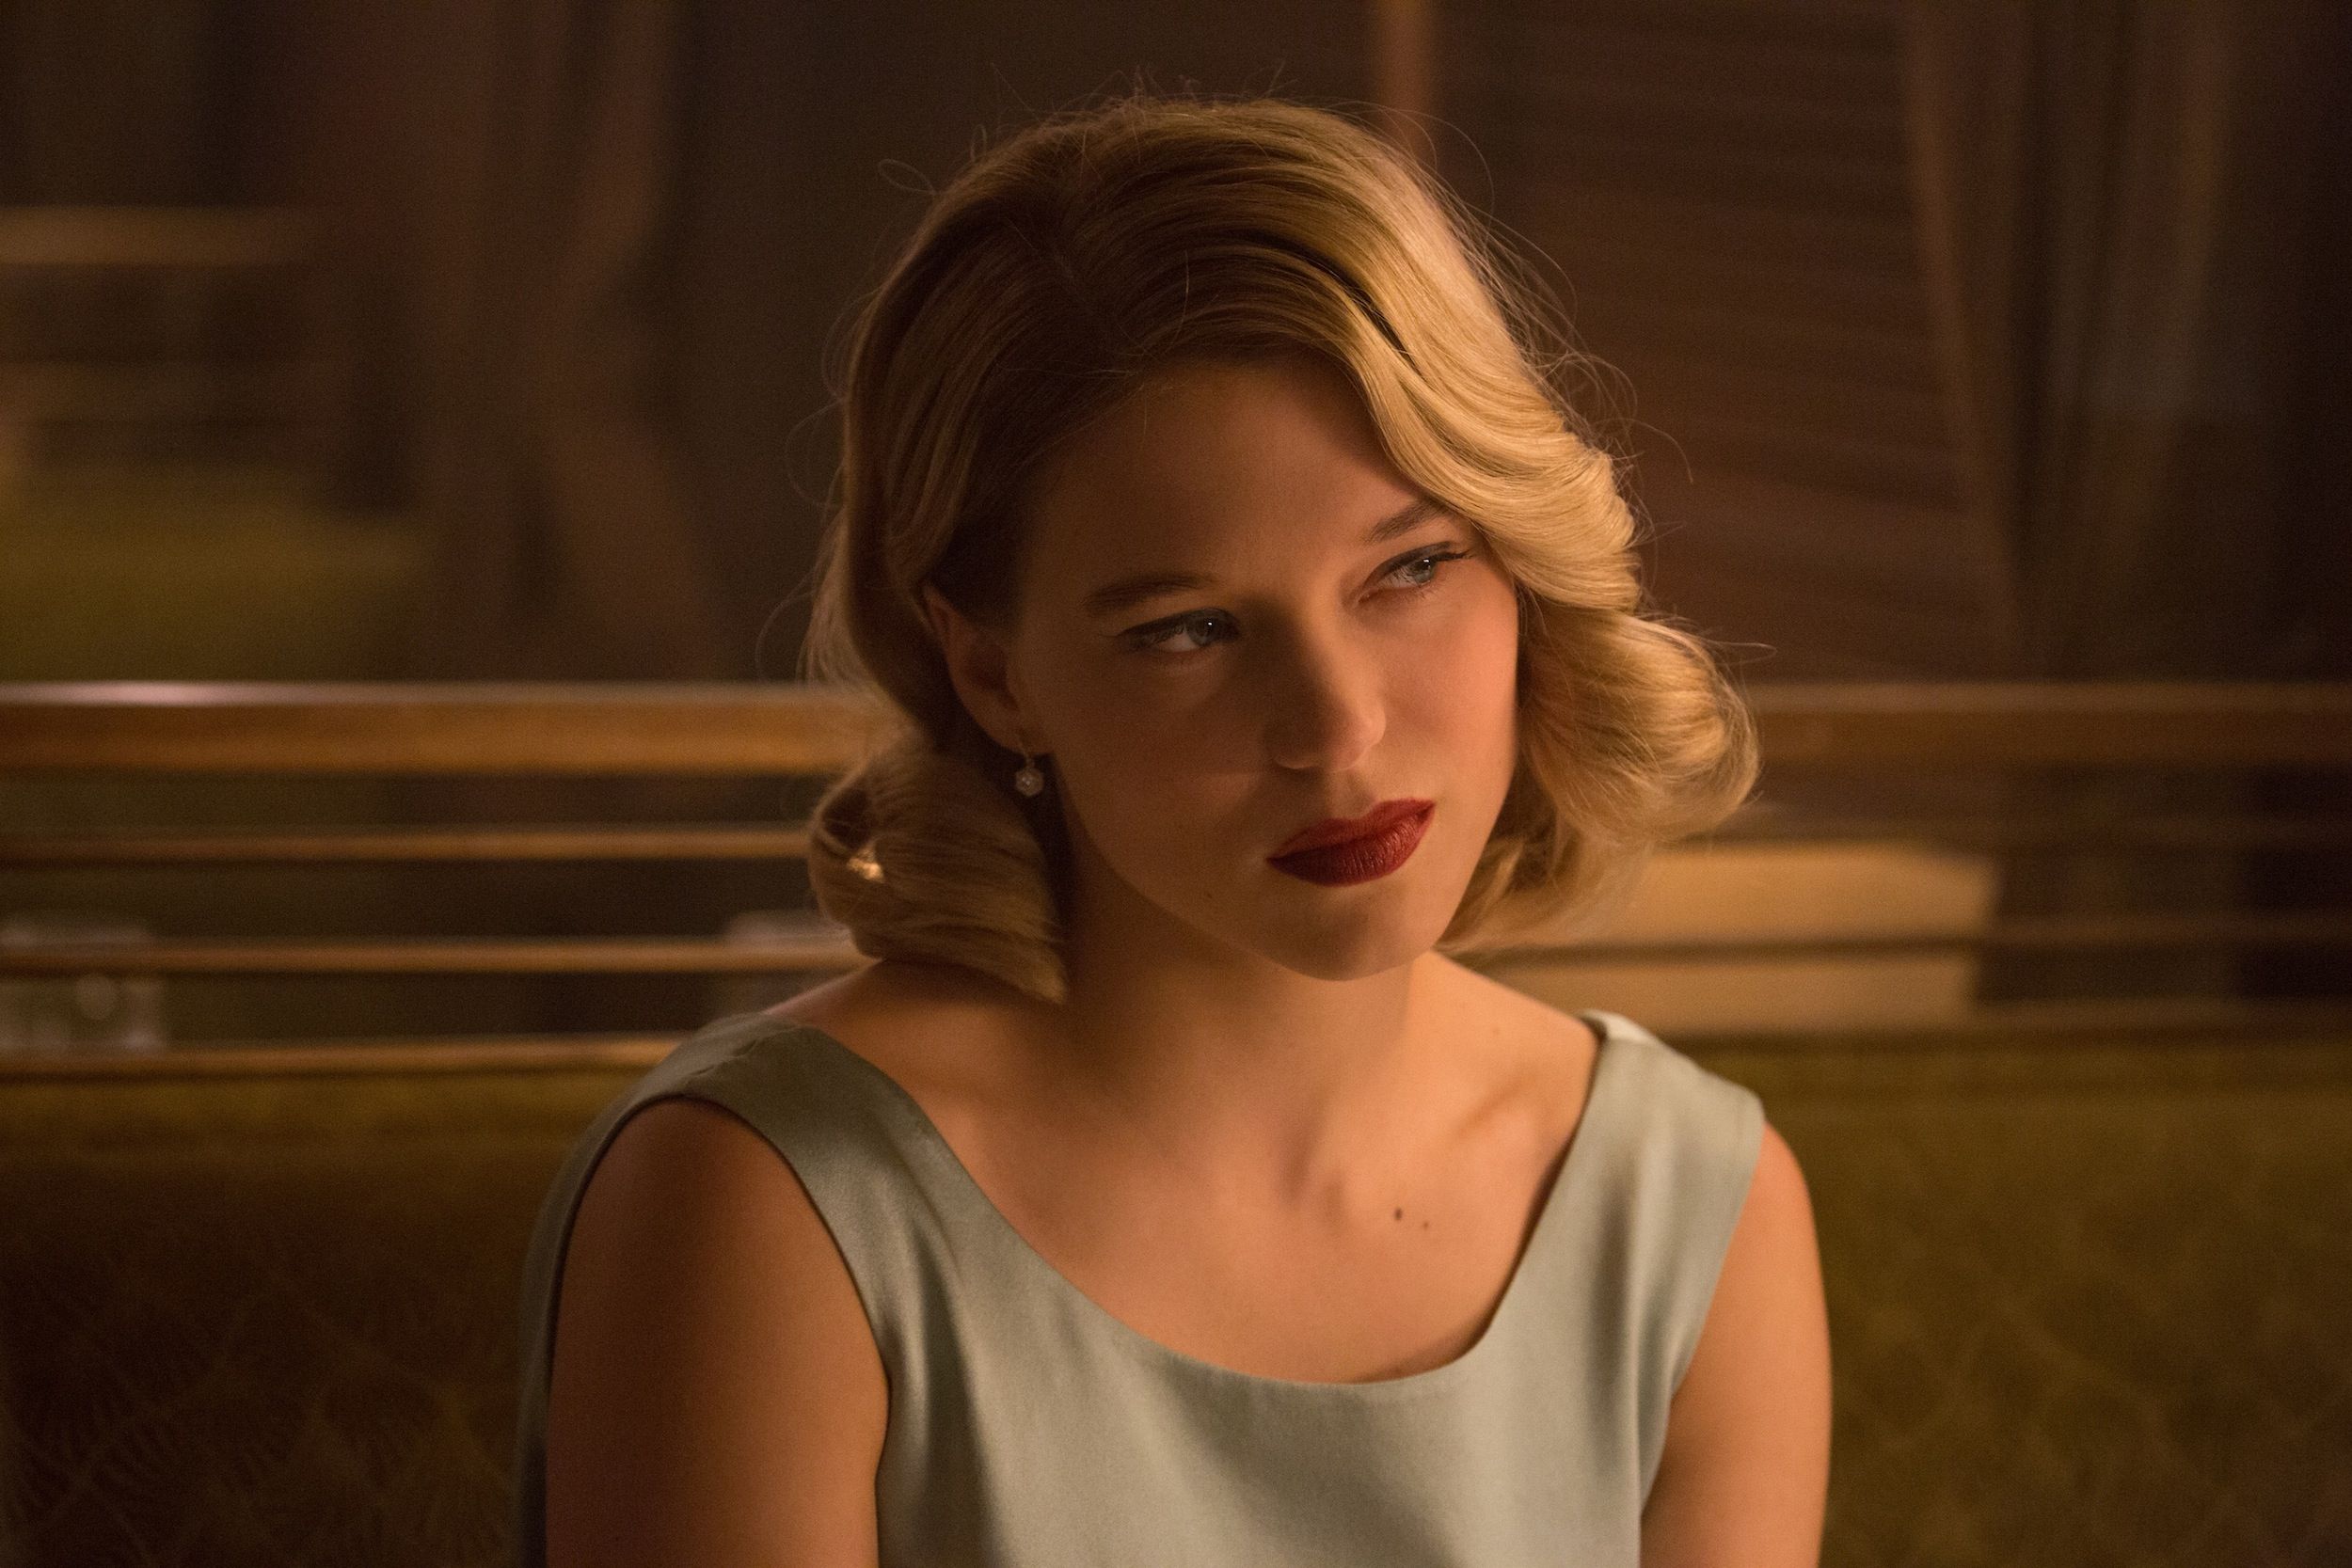 Léa Seydoux Said 'Gambit' Was An Exotic Role: The Script Was Really Good